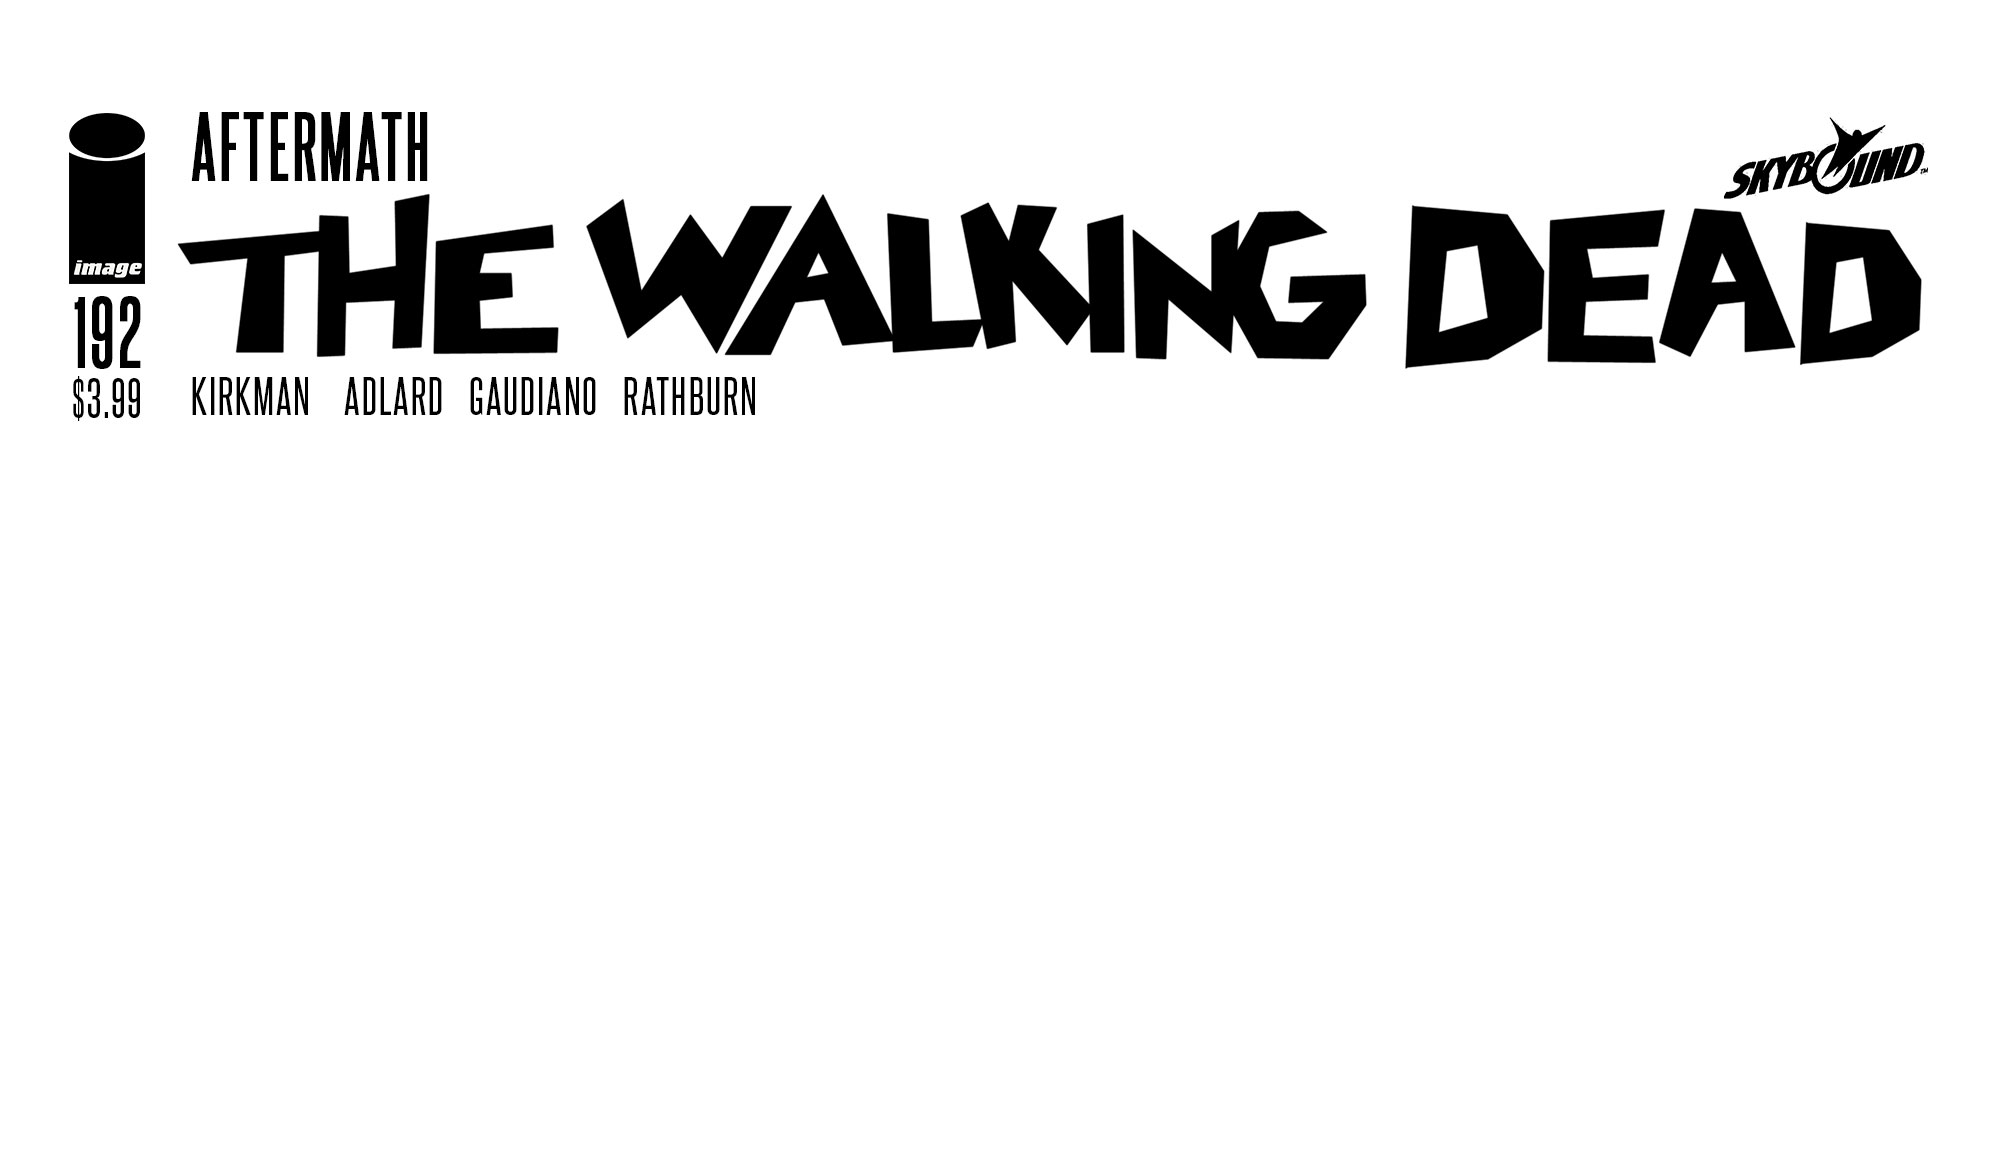 The Walking Dead Issue #192 To Get The Blank Cover Treatment